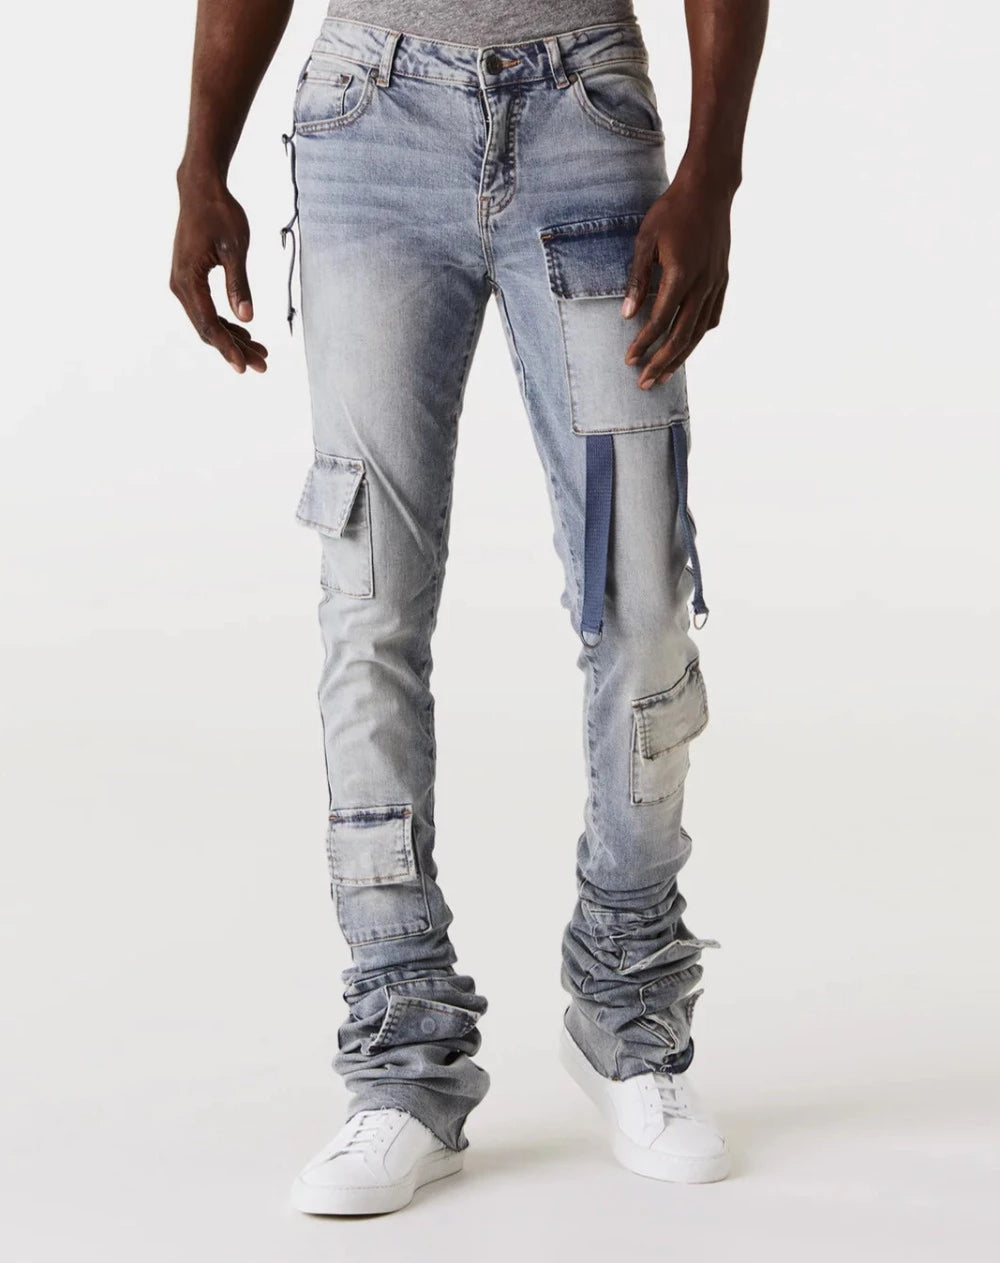 Gunner-Super Stacked Skinny Jeans with Straps & Cargo Pockets